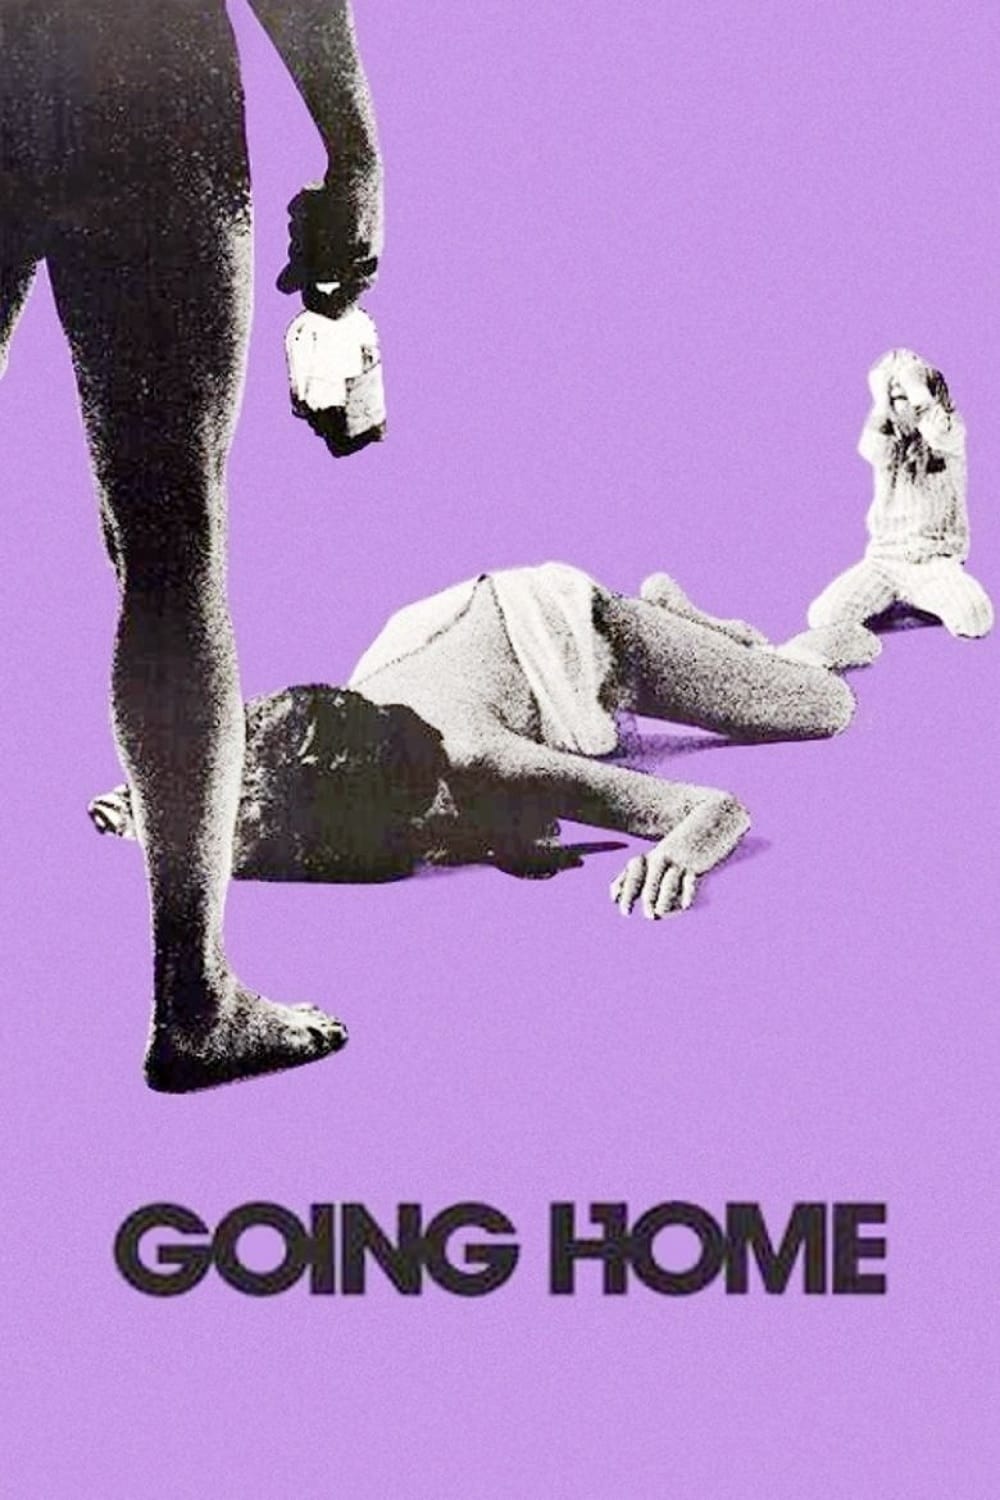 Going Home (1971)